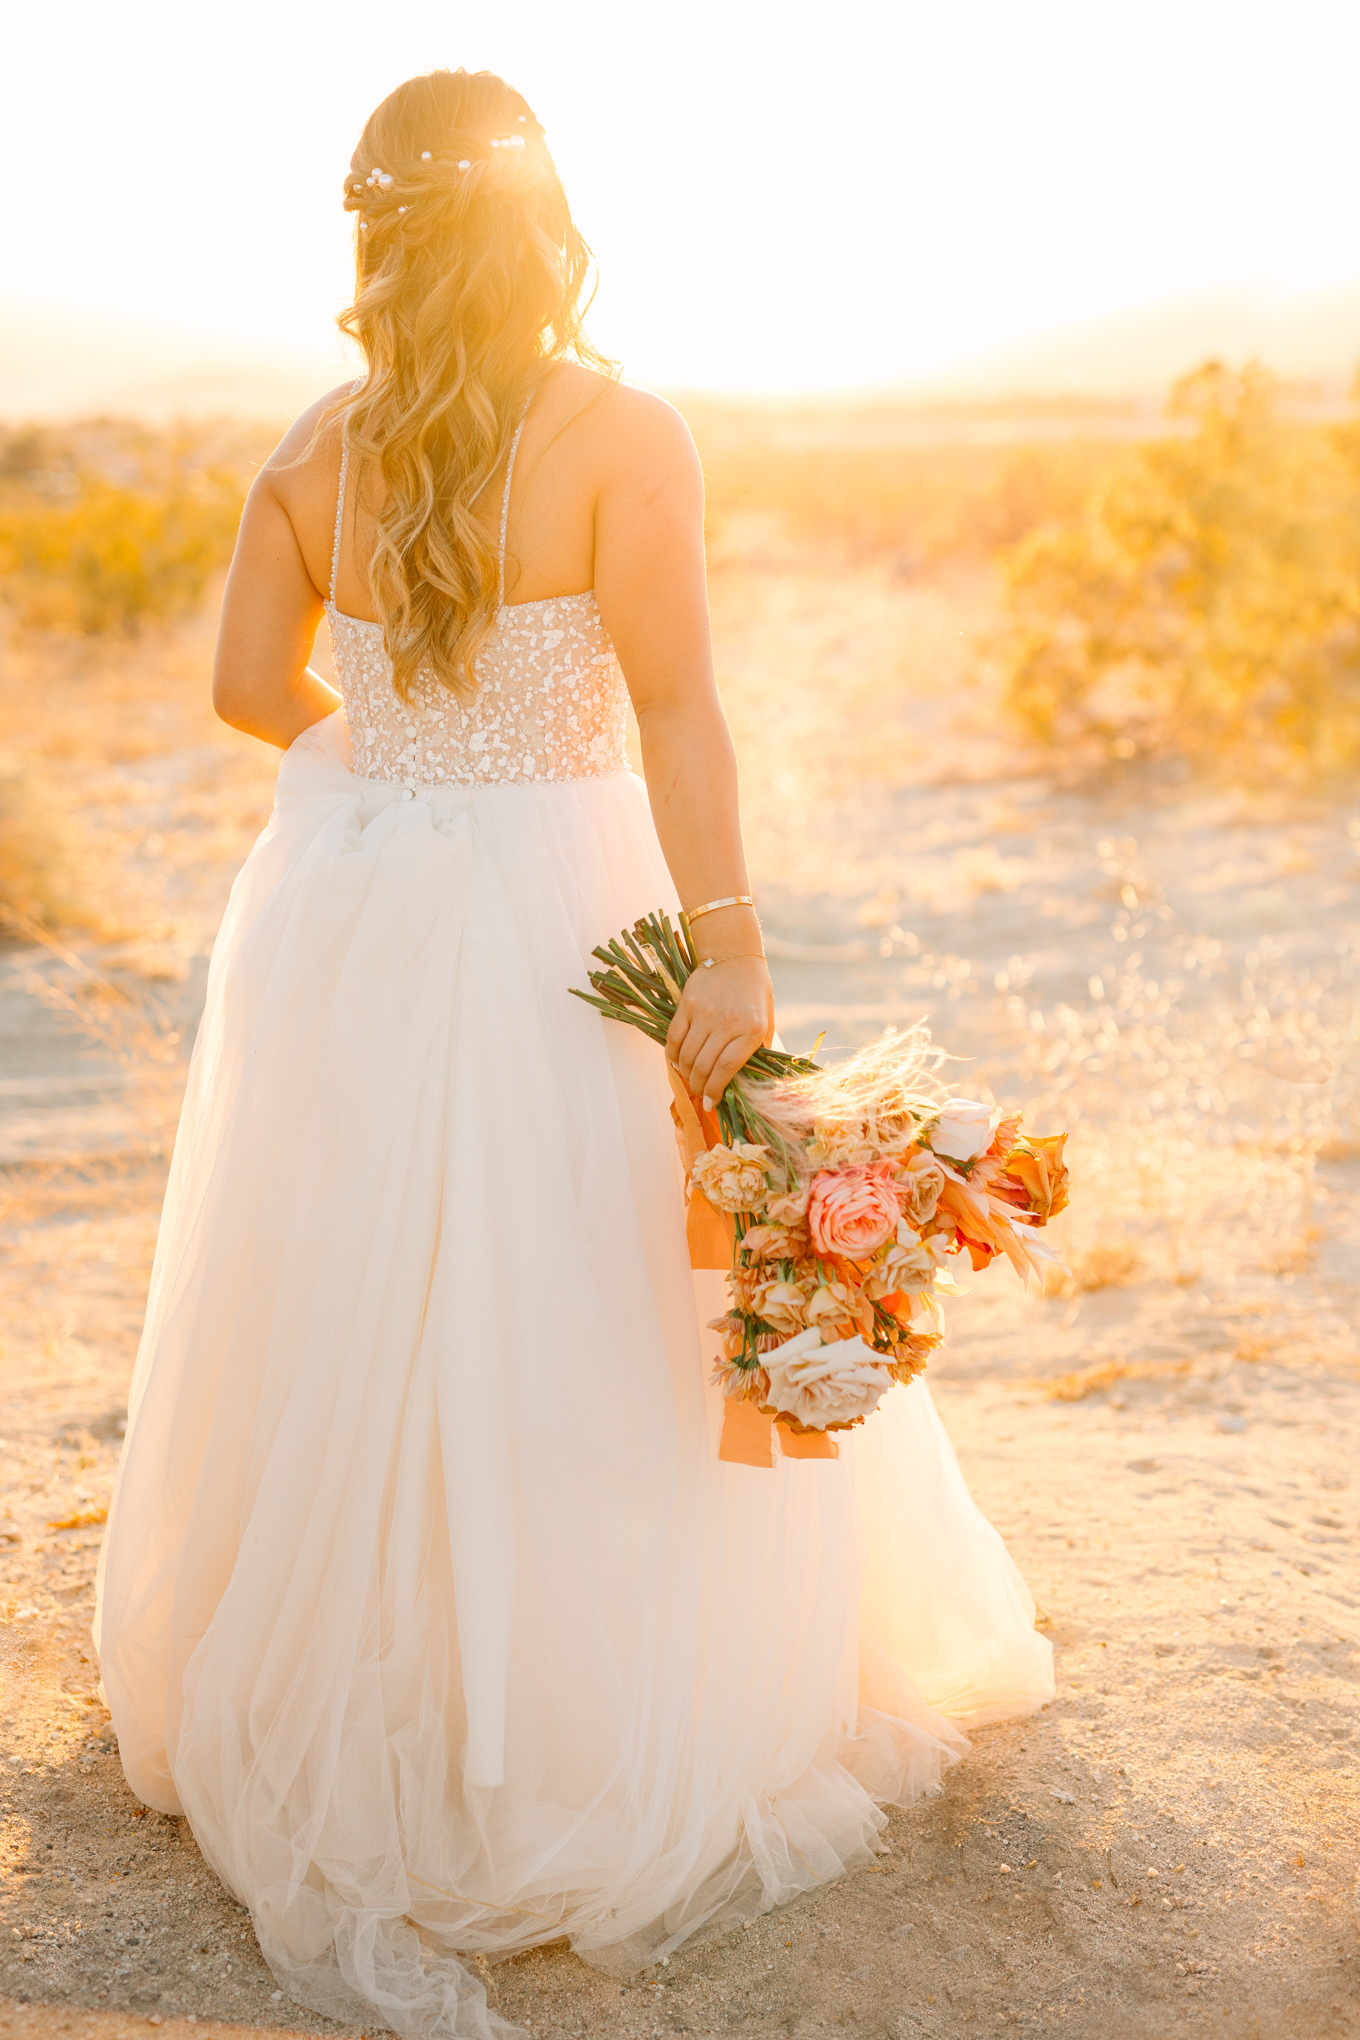 Bride at sunset | Pink and orange Lautner Compound wedding | Colorful Palm Springs wedding photography | #palmspringsphotographer #palmspringswedding #lautnercompound #southerncaliforniawedding  Source: Mary Costa Photography | Los Angeles